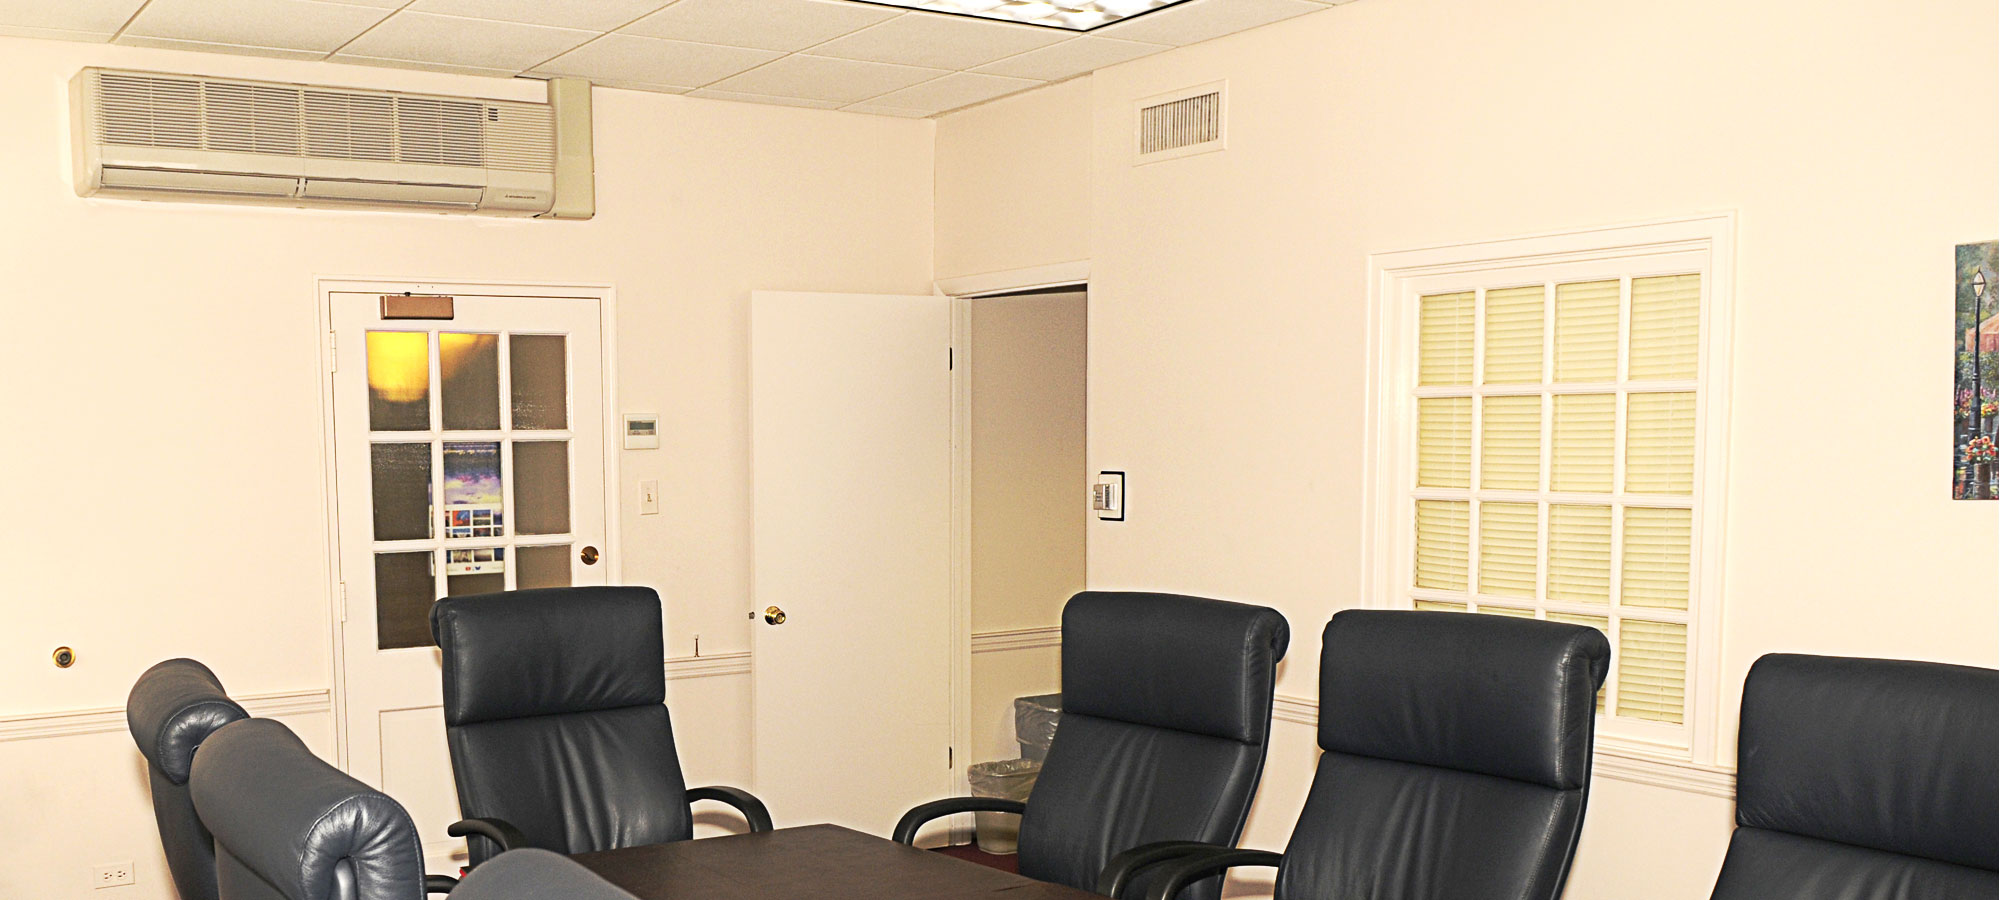 Ductless in a commerical meeting room